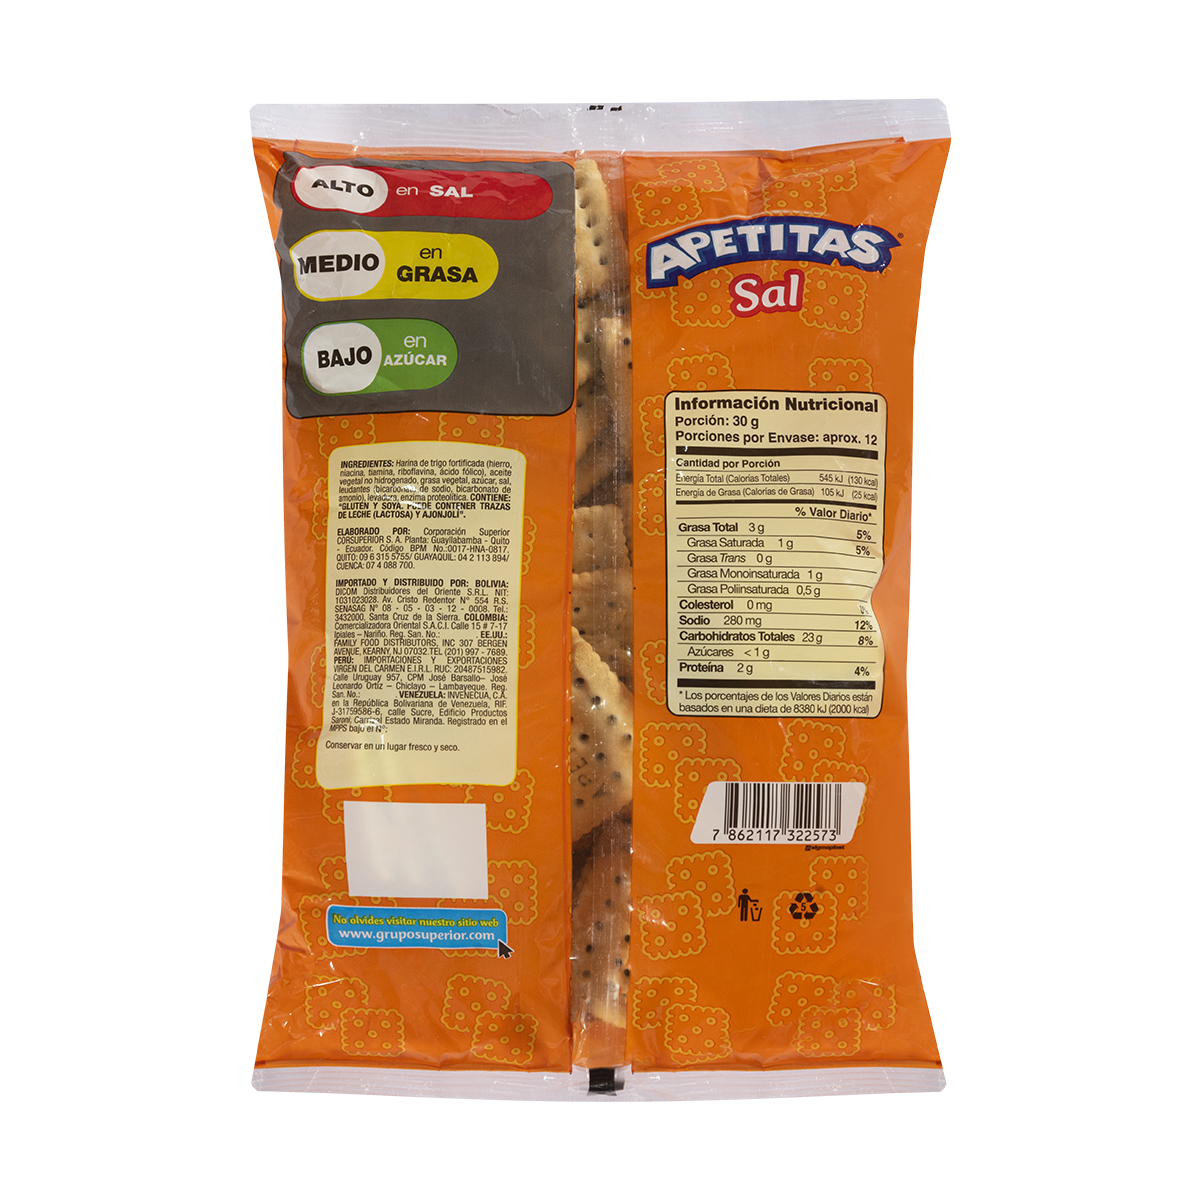 TOSTITOS Tortilla Rounds Chips